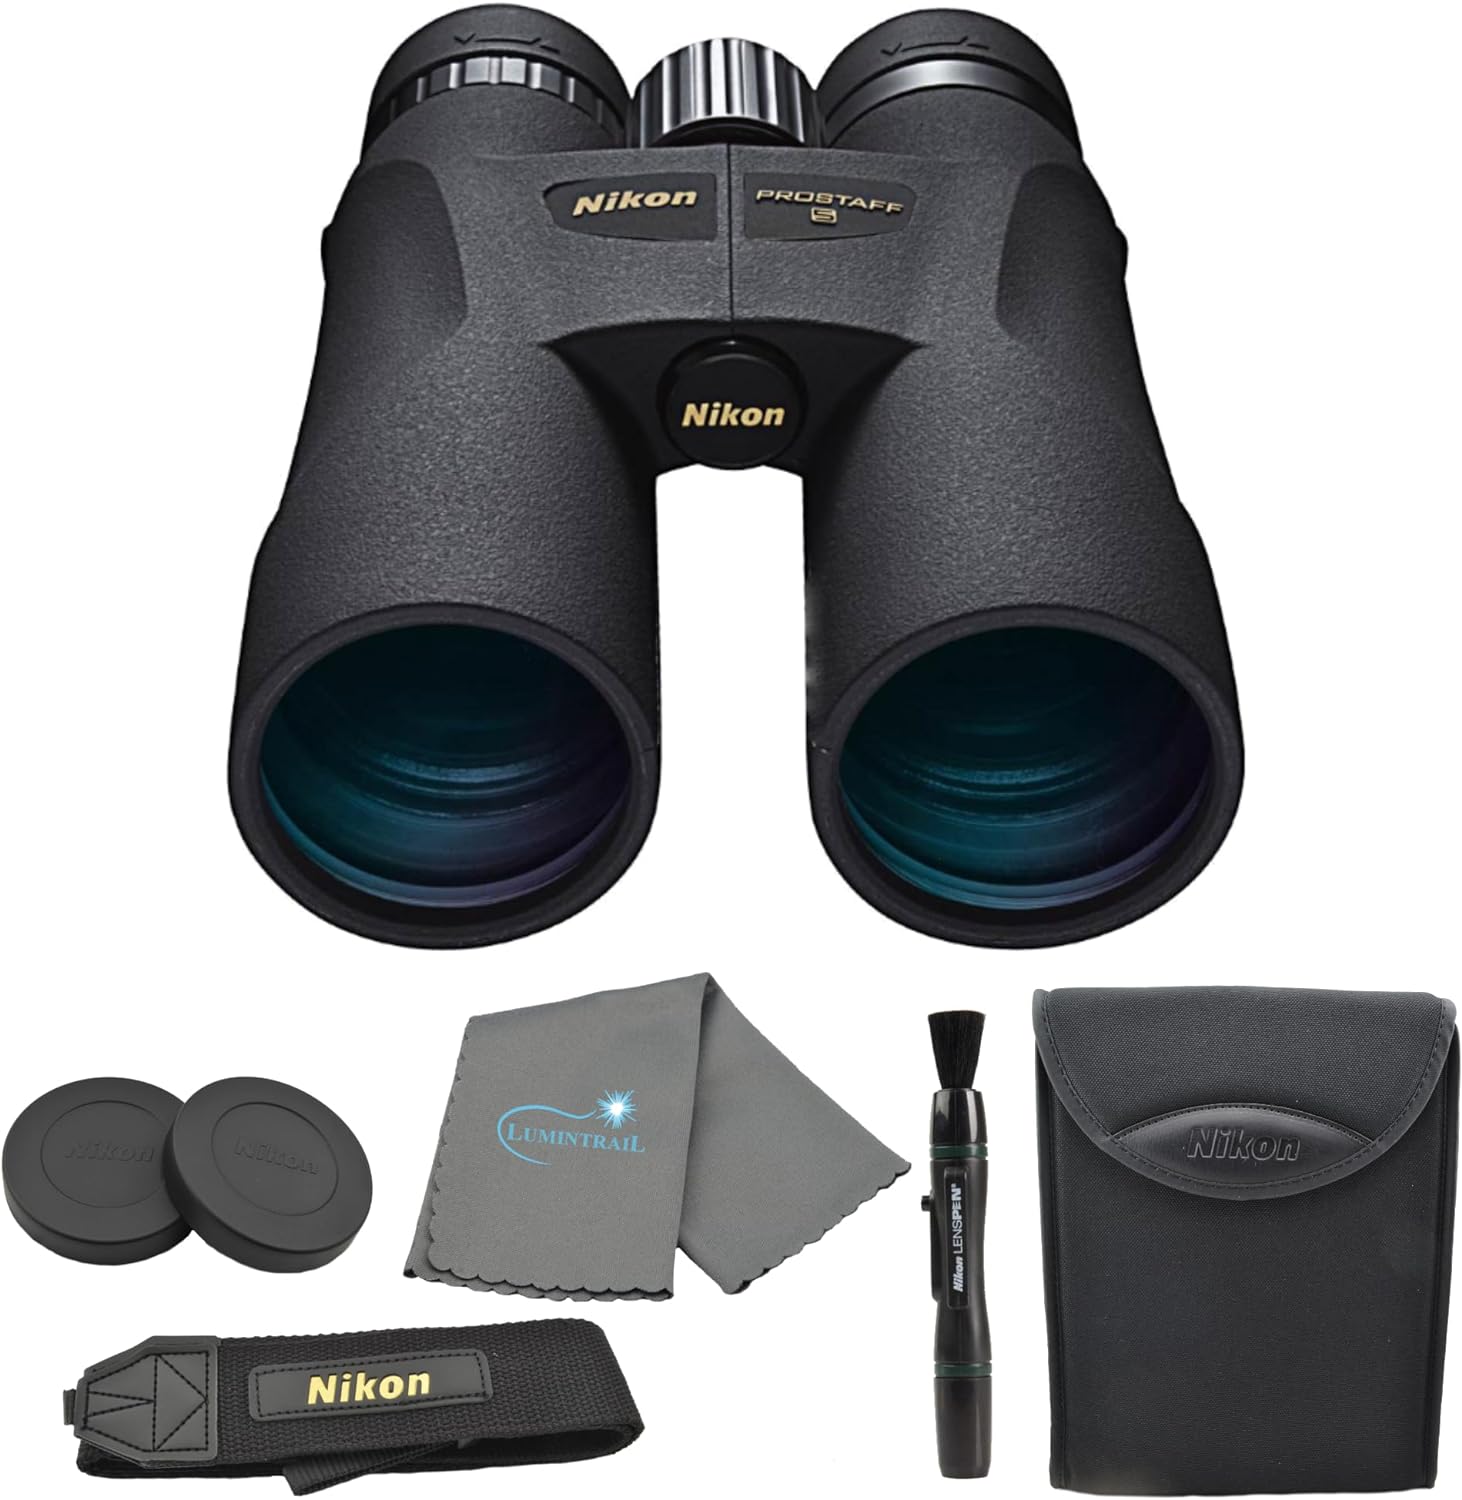 Nikon PROSTAFF 5 10x50 (7572) Black Binoculars Bundle with Lens Pen and Cleaning Cloth, Compact Binoculars for Adults for Hunting, Bird Watching, and Hiking Essentials, Zoom Optics Lightweight Travel